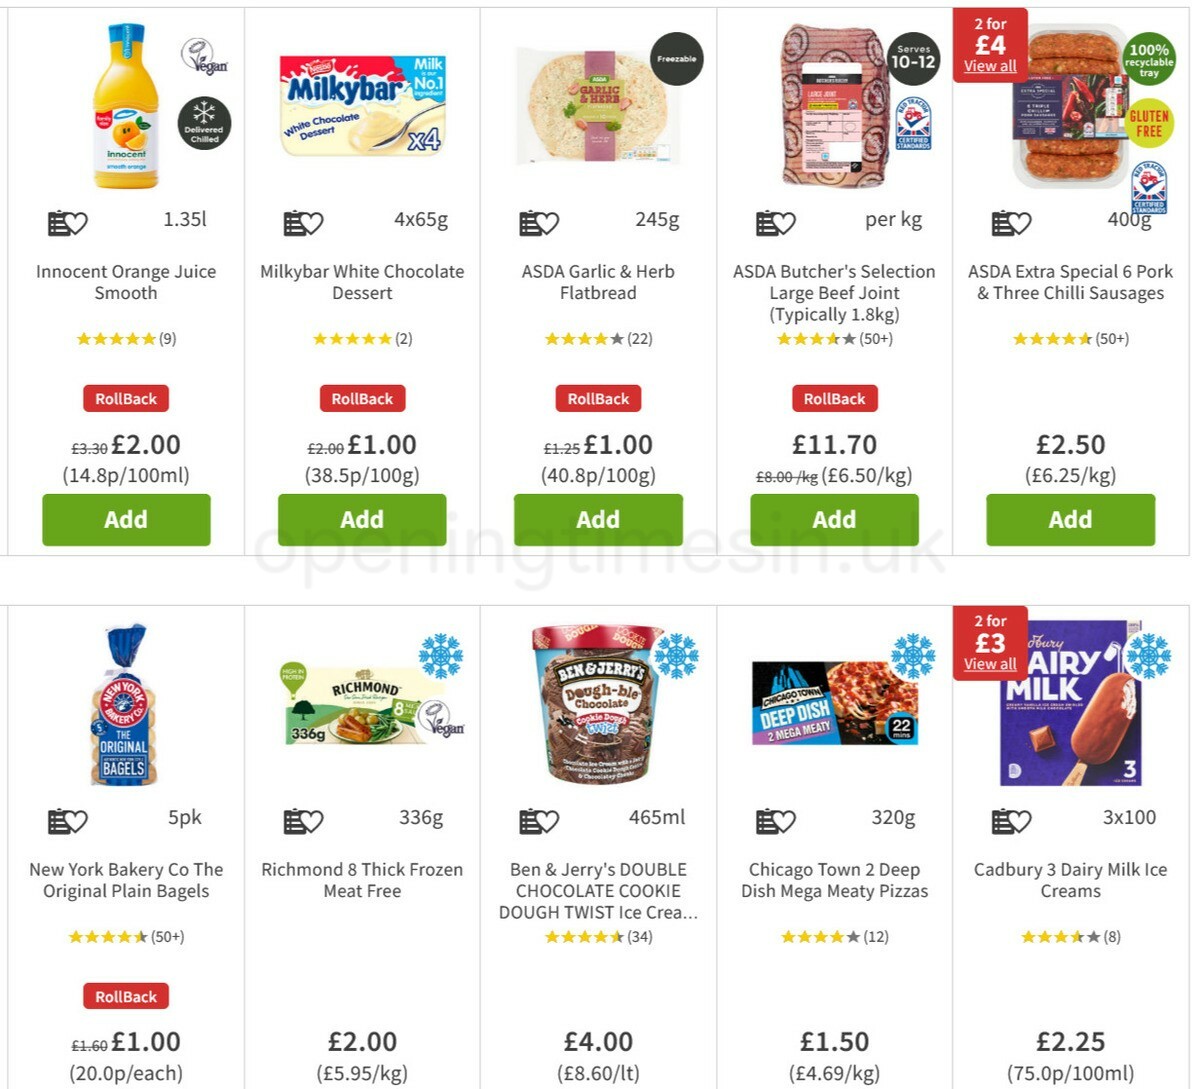 ASDA Offers from 18 June